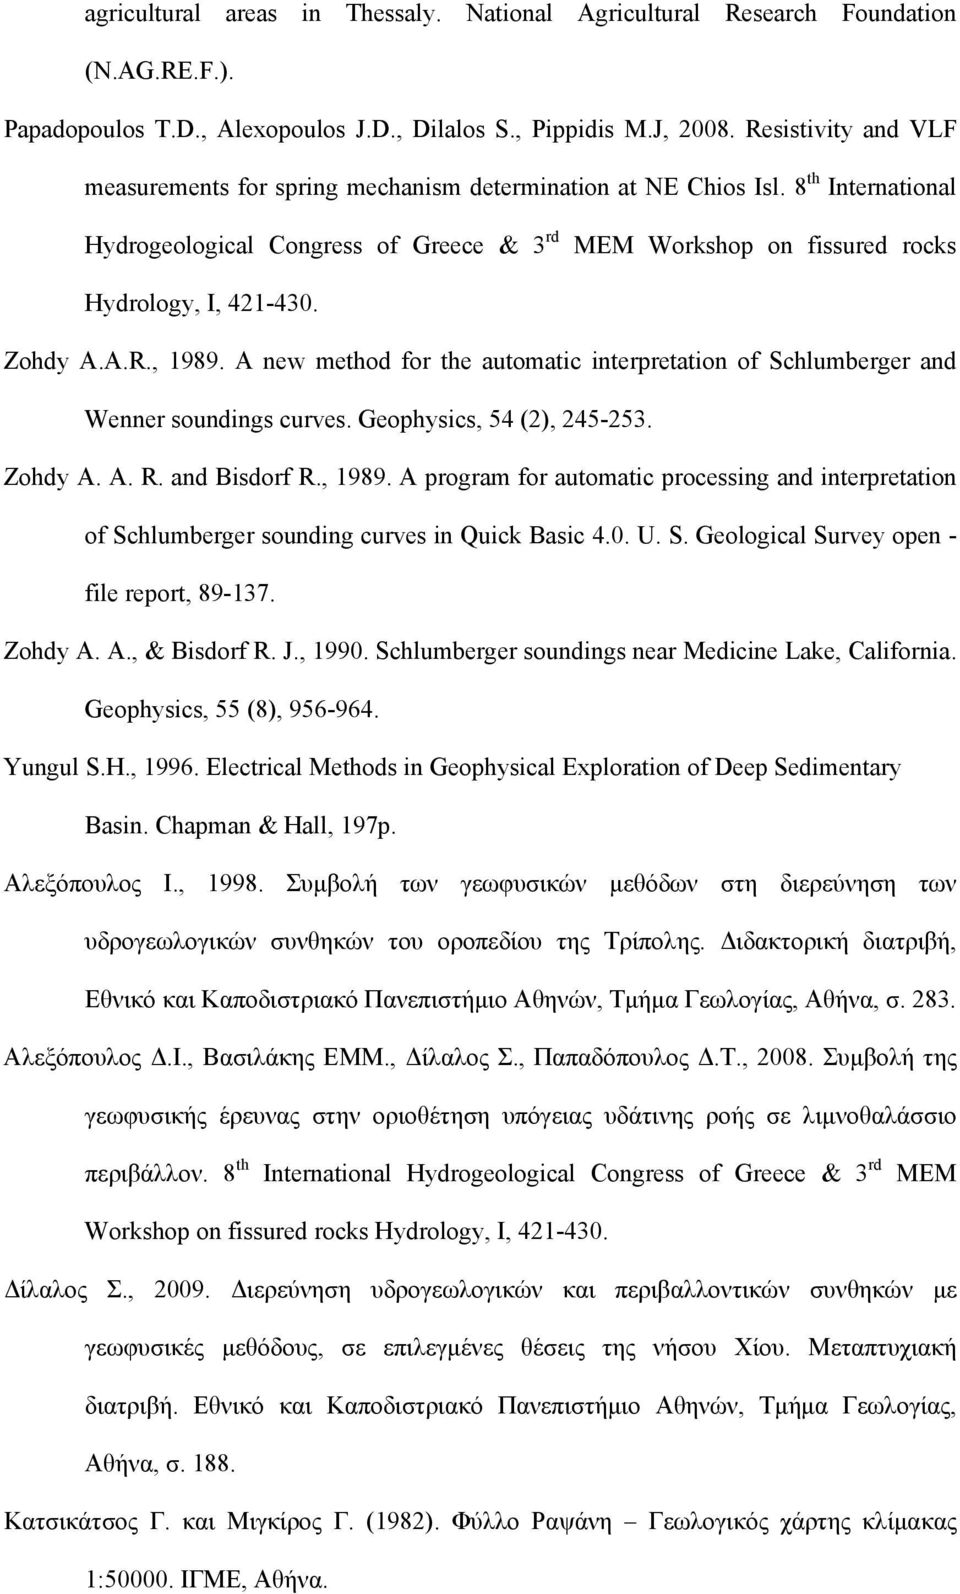 Zohdy A.A.R., 1989. A new method for the automatic interpretation of Schlumberger and Wenner soundings curves. Geophysics, 54 (2), 245-253. Zohdy A. A. R. and Bisdorf R., 1989. A program for automatic processing and interpretation of Schlumberger sounding curves in Quick Basic 4.